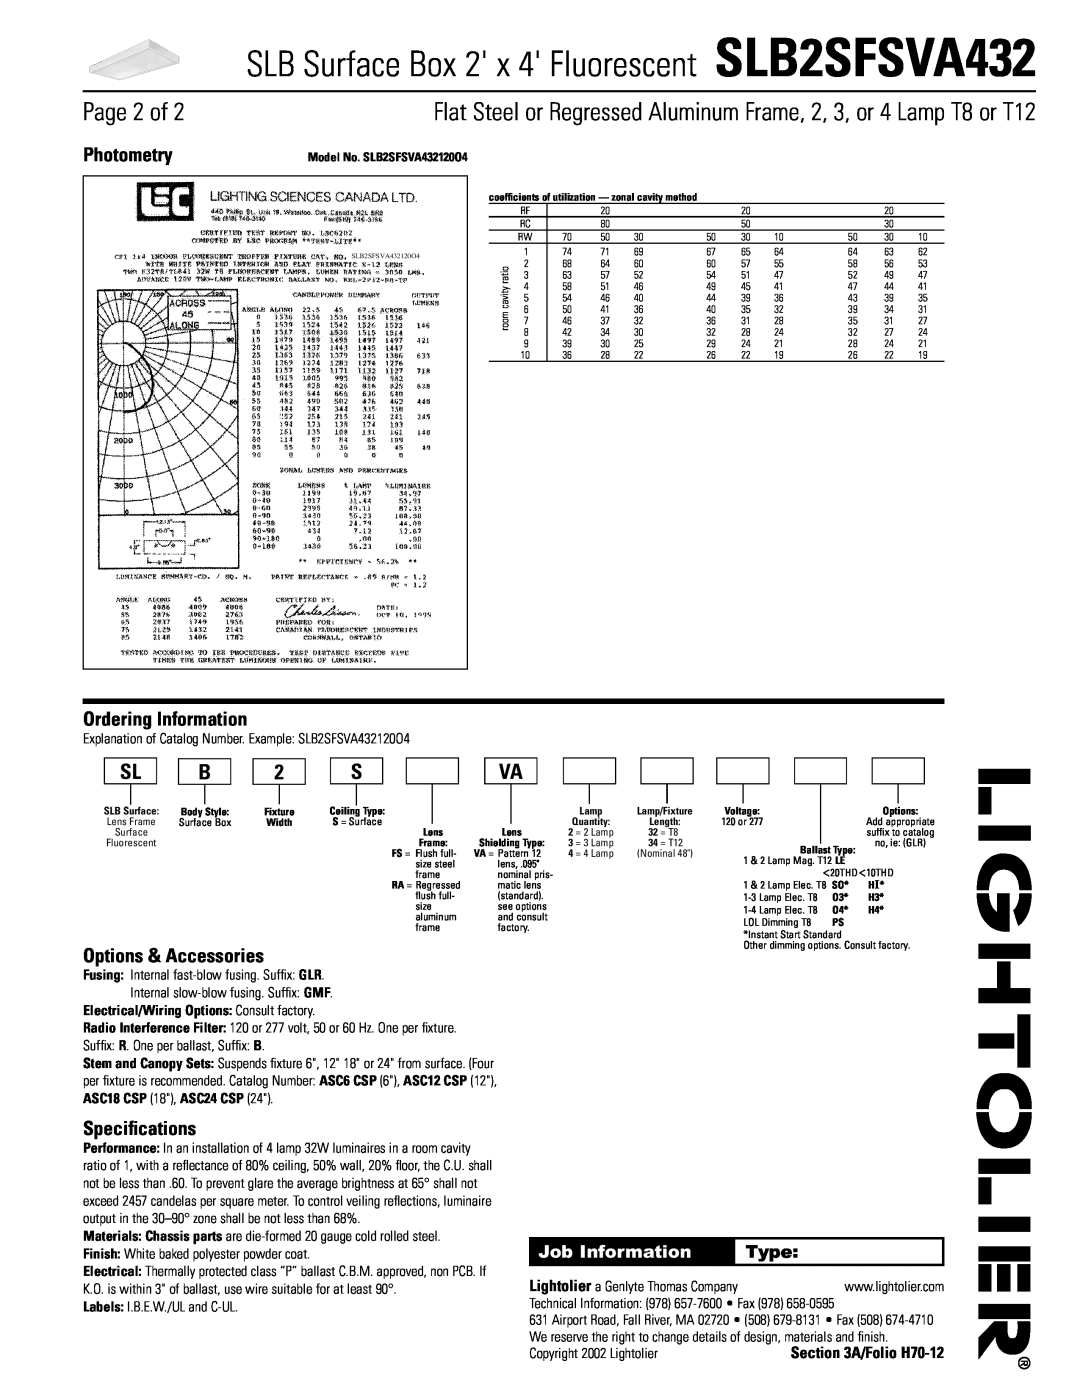 Lightolier SLB2SFSVA432 Page 2 of, Photometry, Ordering Information, Options & Accessories, Speciﬁcations, Job Information 